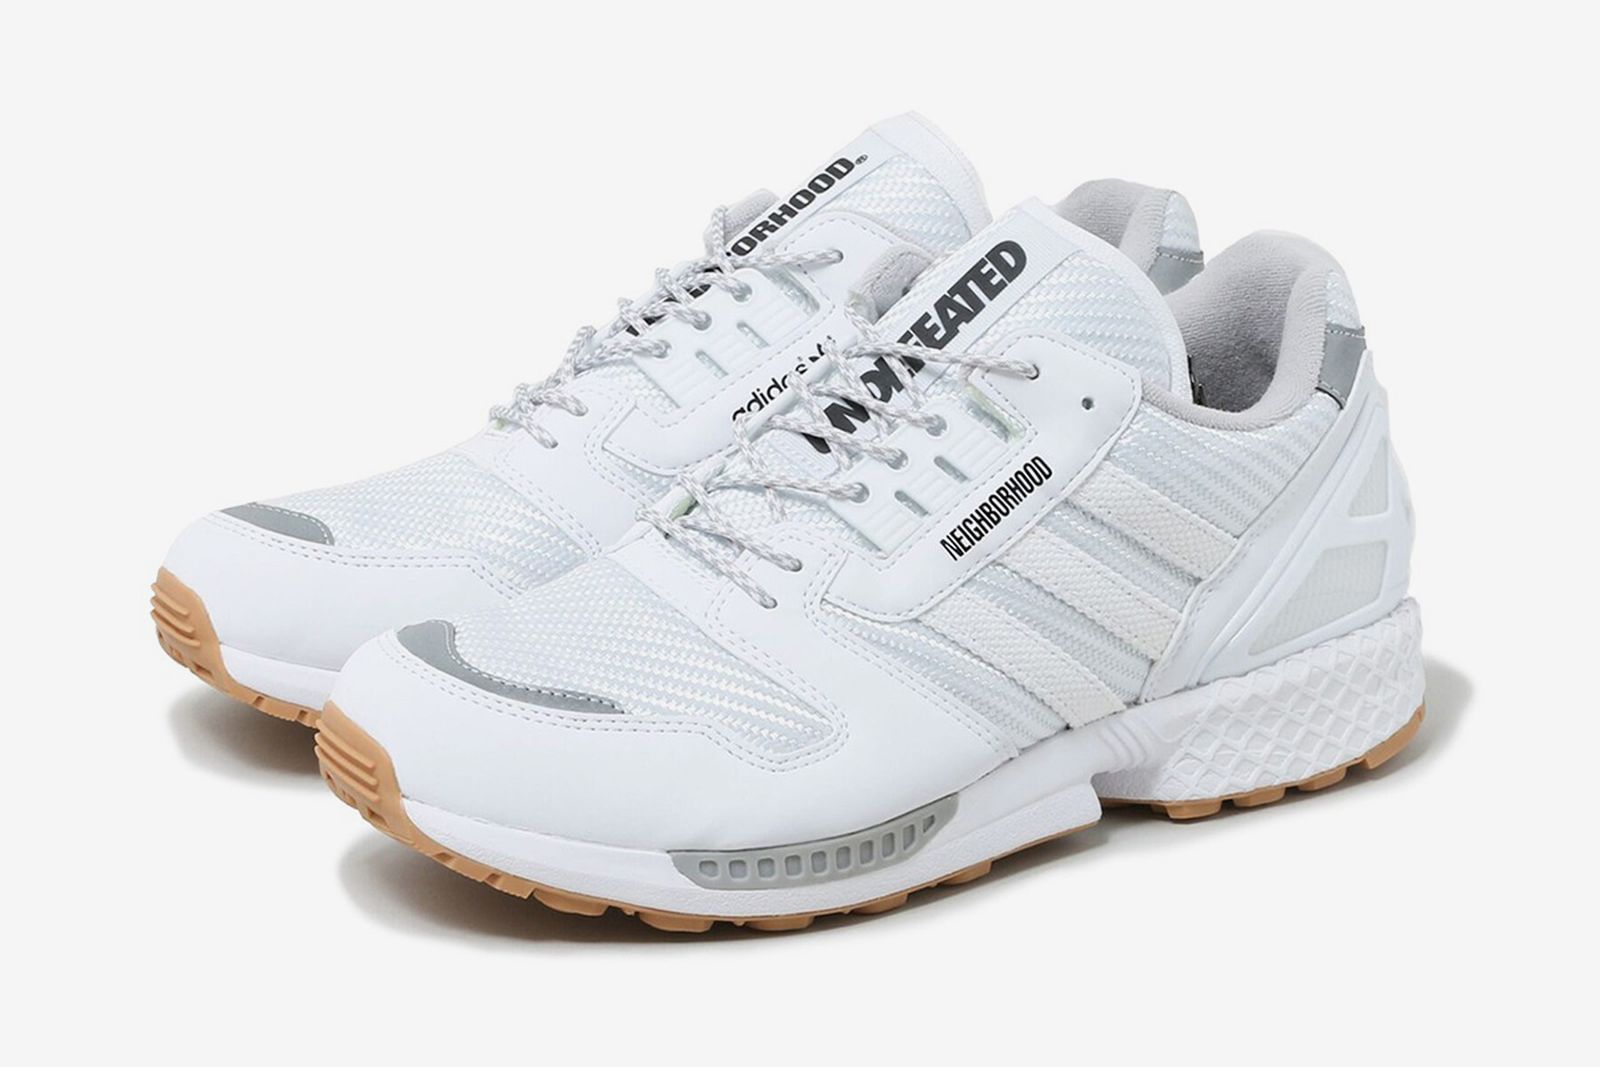 neighborhood-undefeated-adidas-zx-collaboration-release-date-price-02